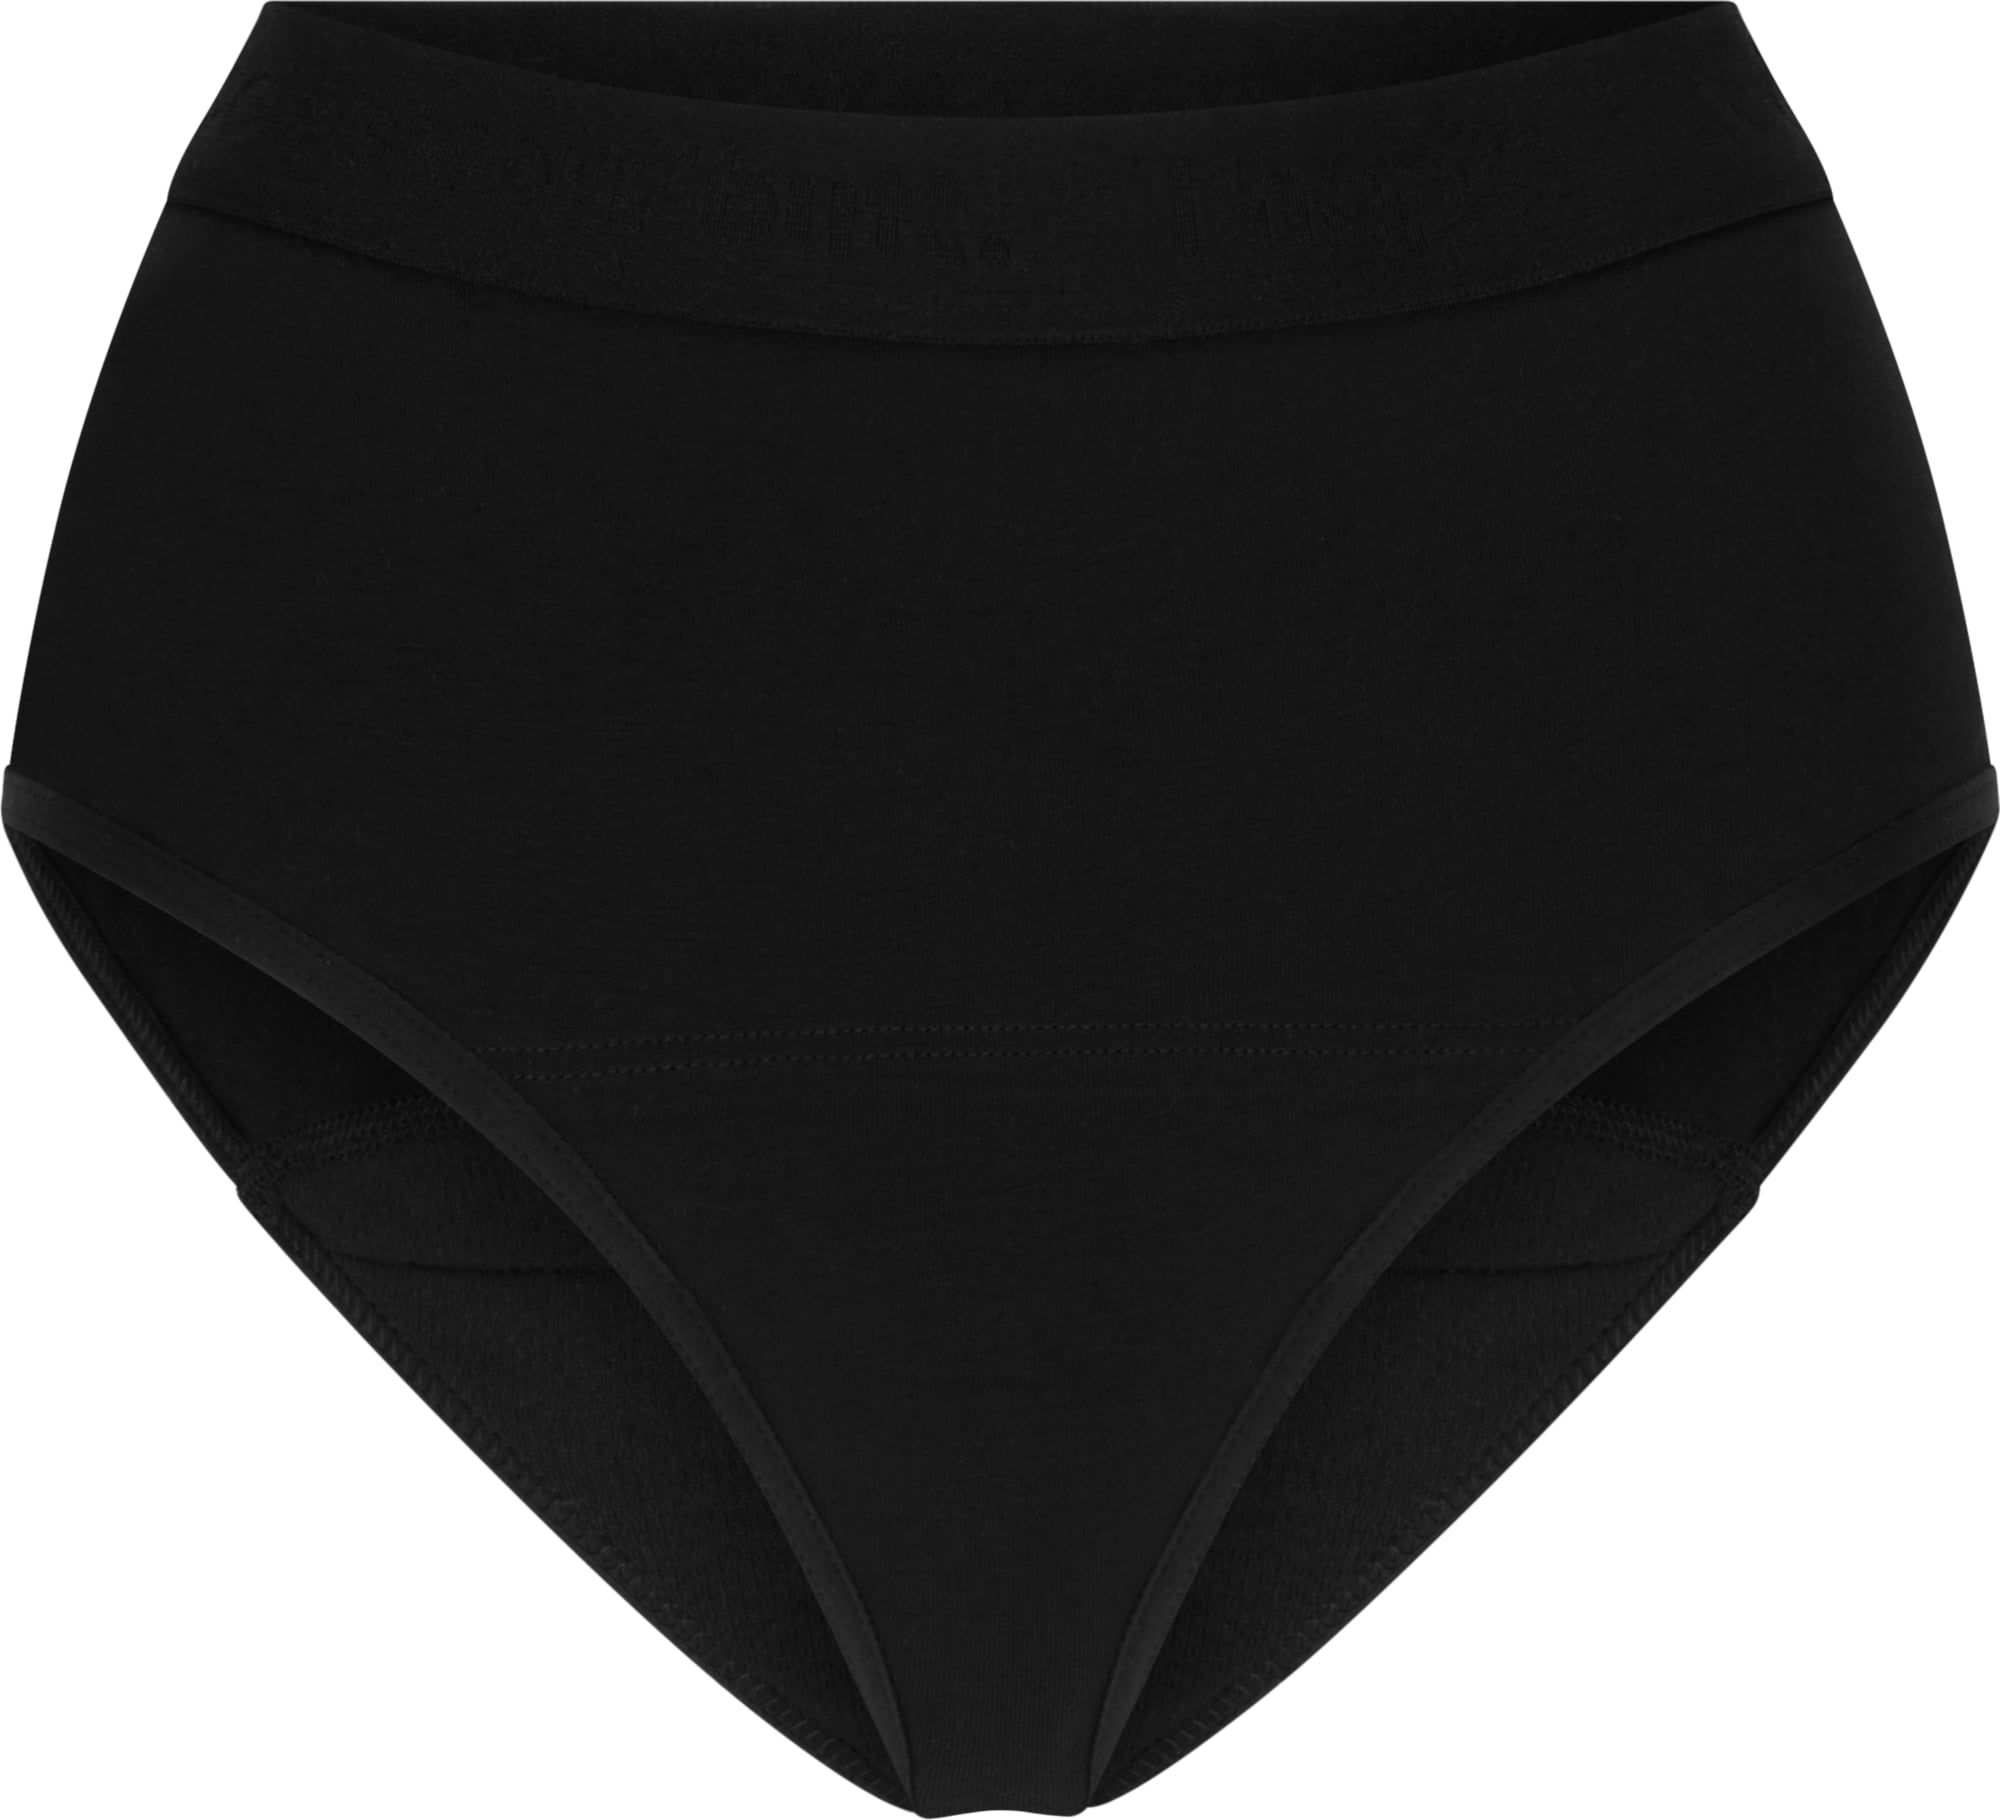 The Female Company Period Underwear - Hipster Basic Black Normal